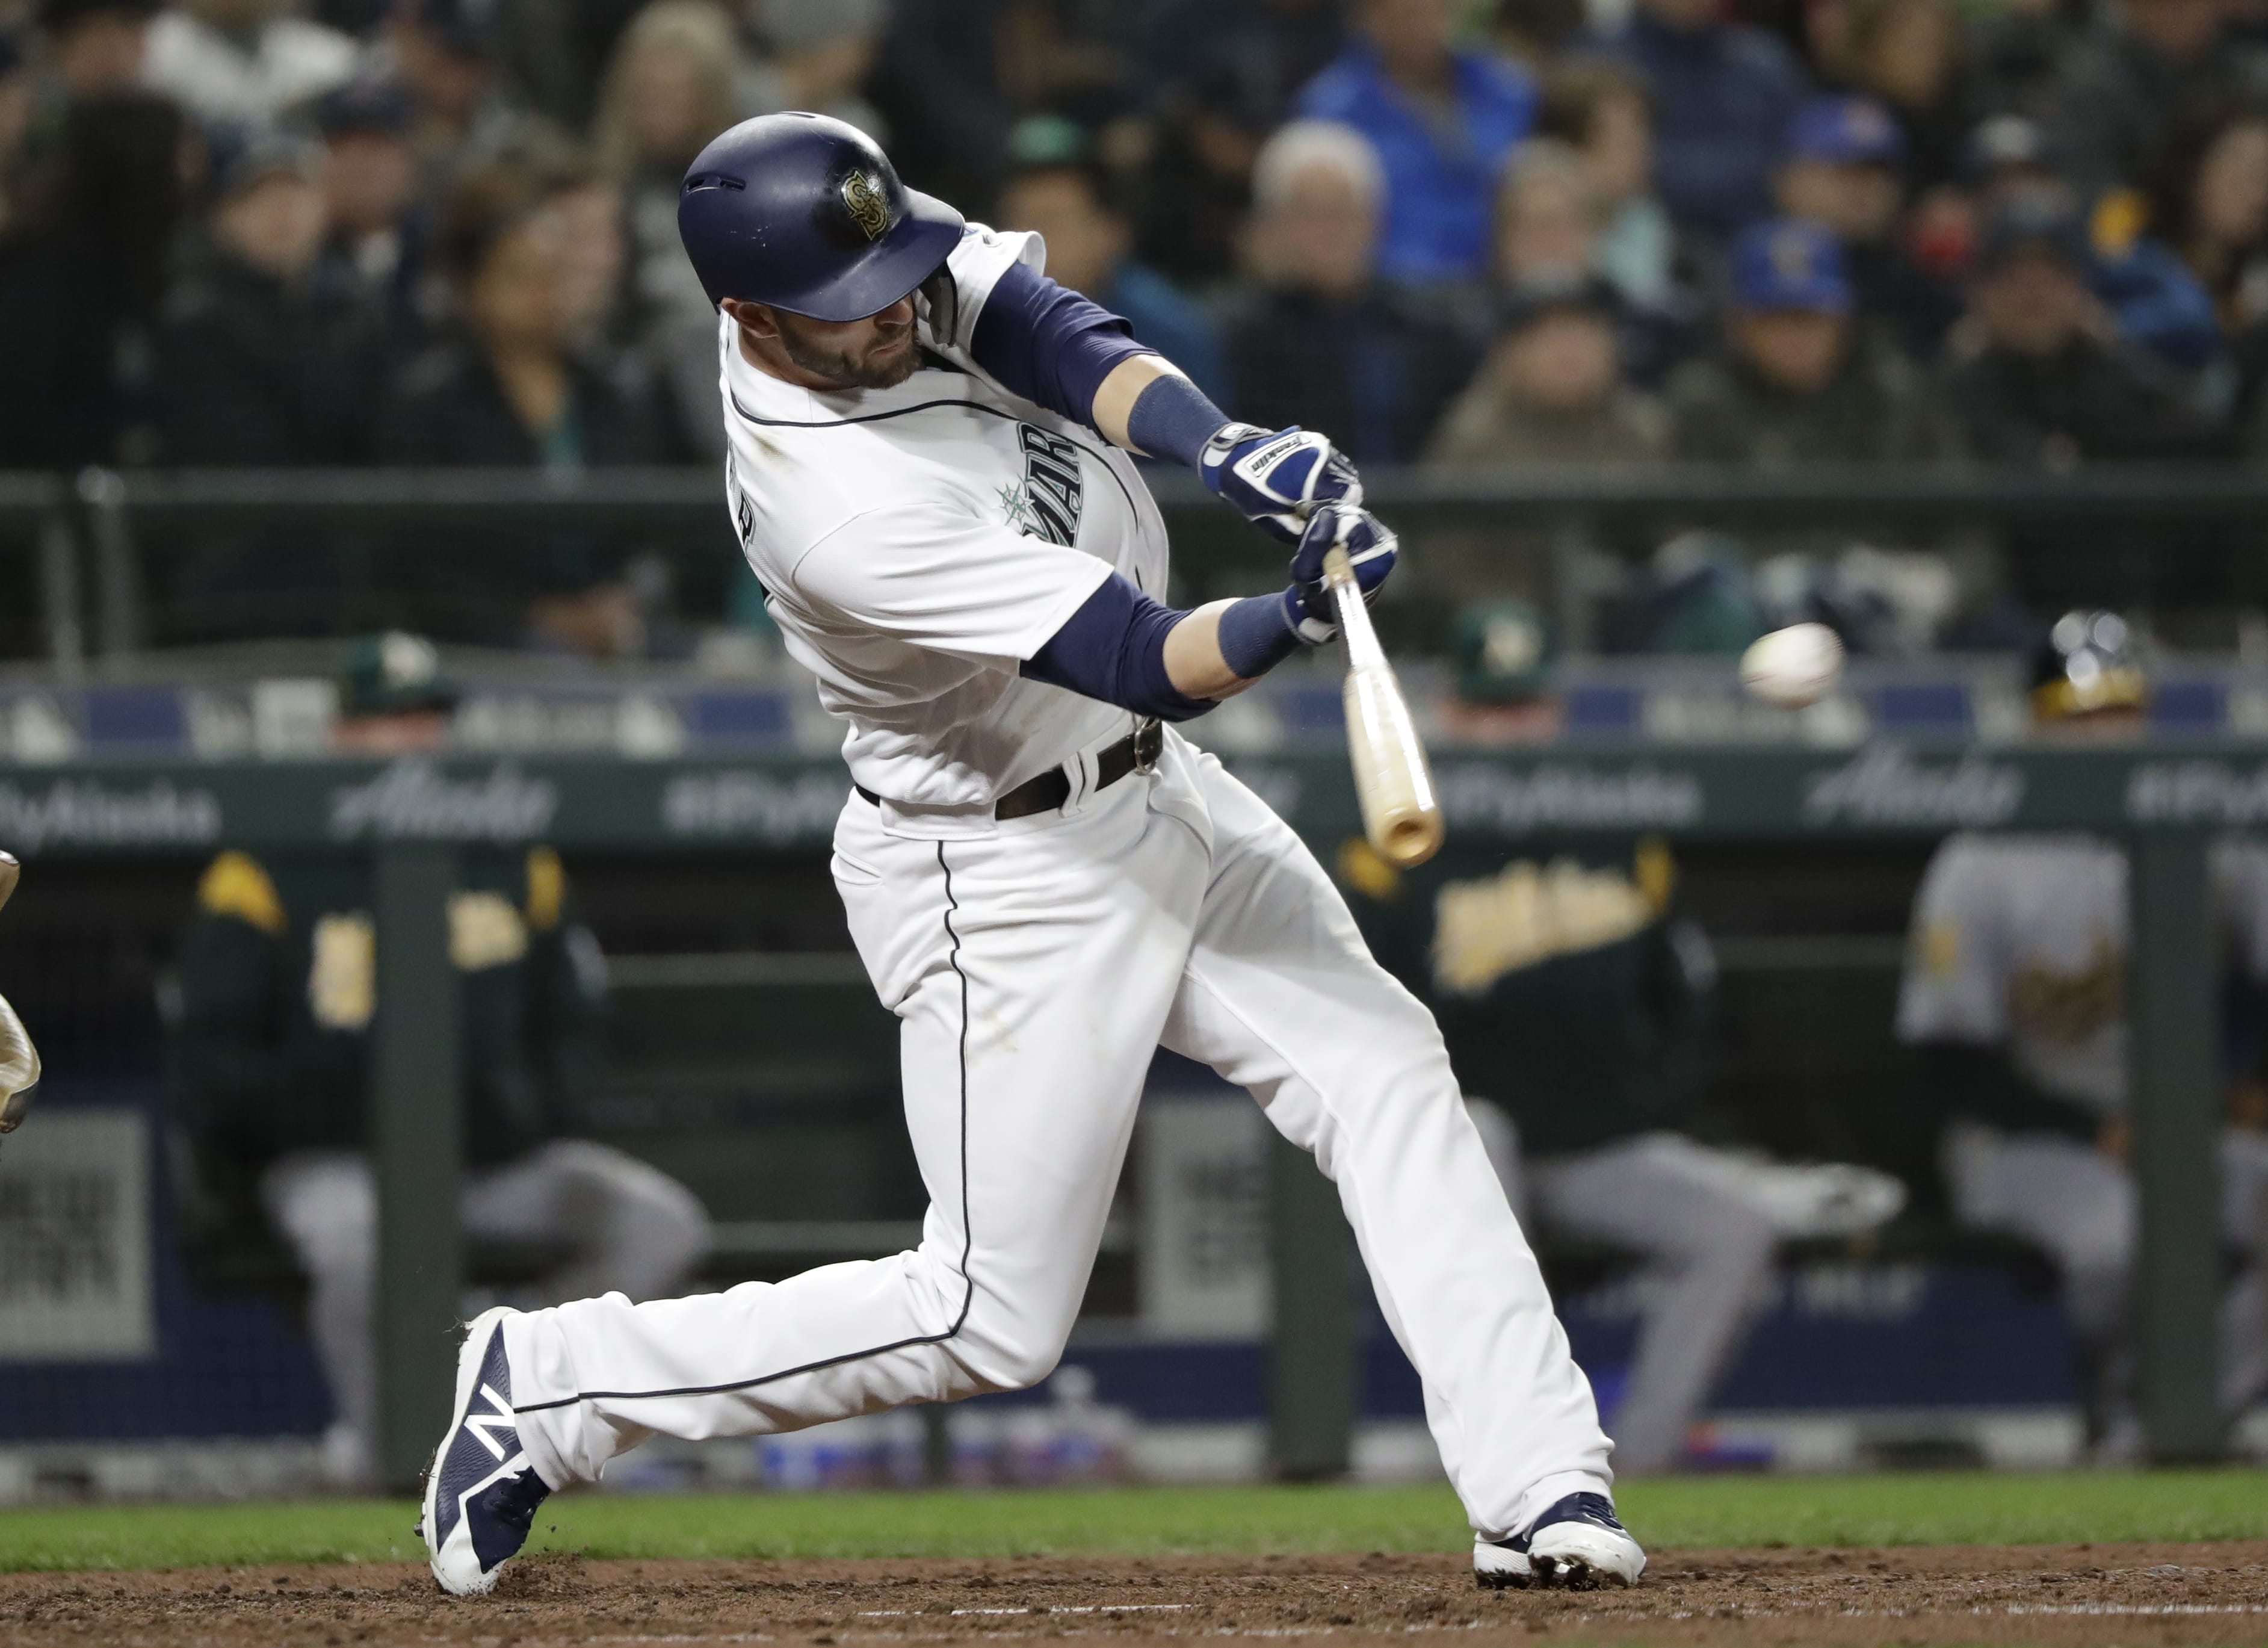 Seattle Mariners' Mitch Haniger connects on a 2-RBI single against the Oakland Athletics in the third inning during a baseball game Saturday, April 14, 2018, in Seattle.